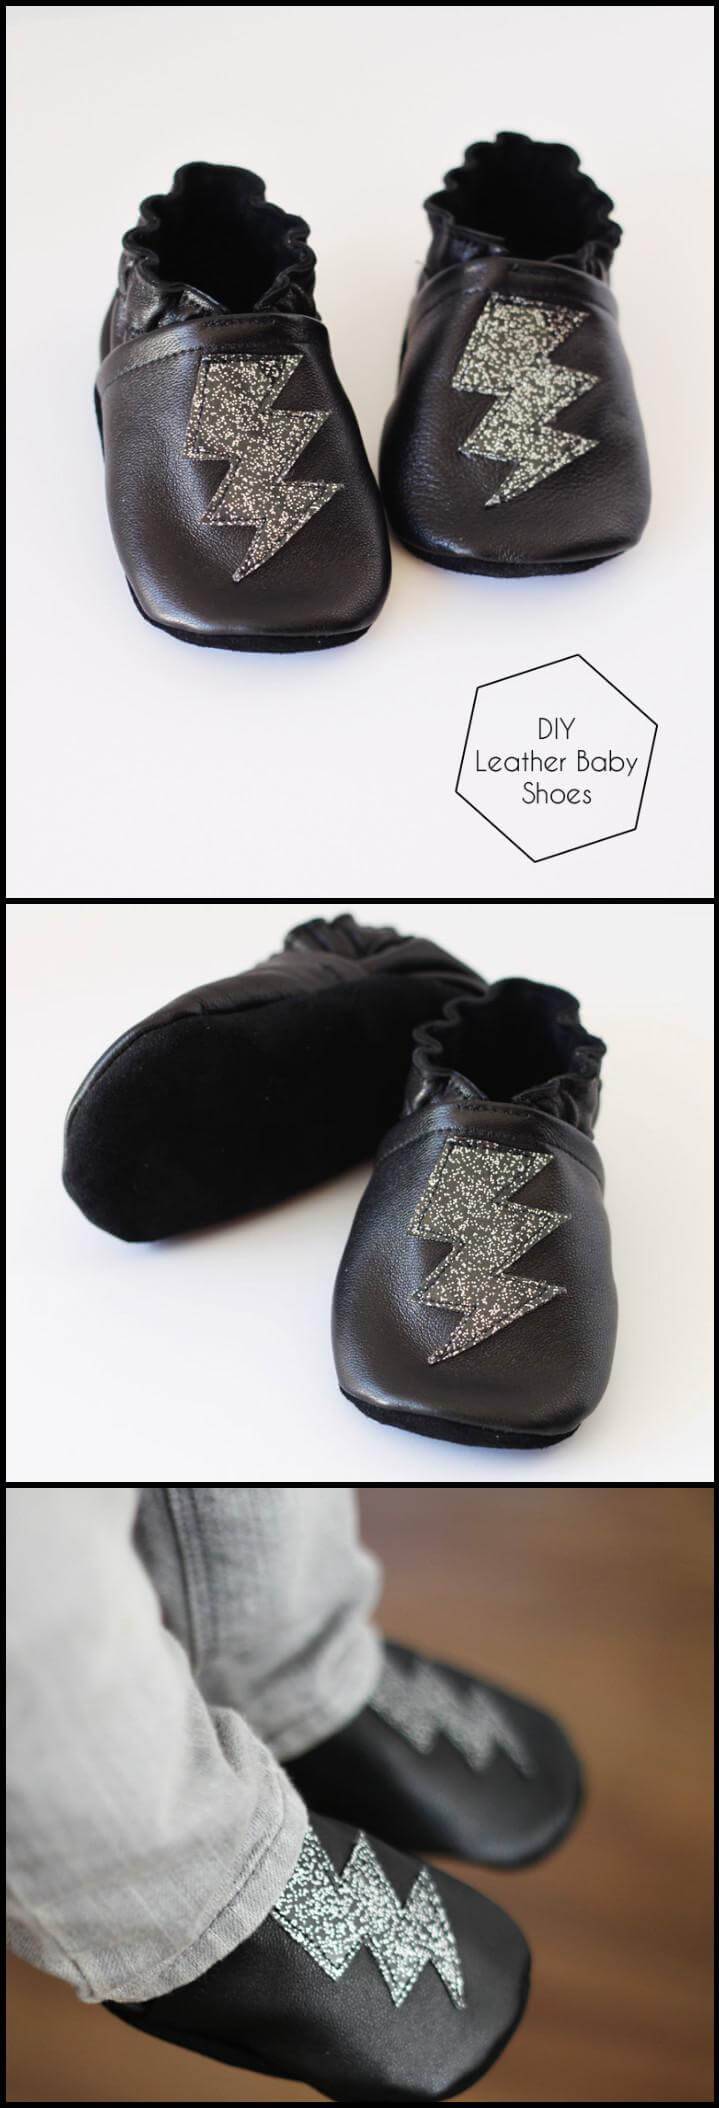 self-made leather baby booties